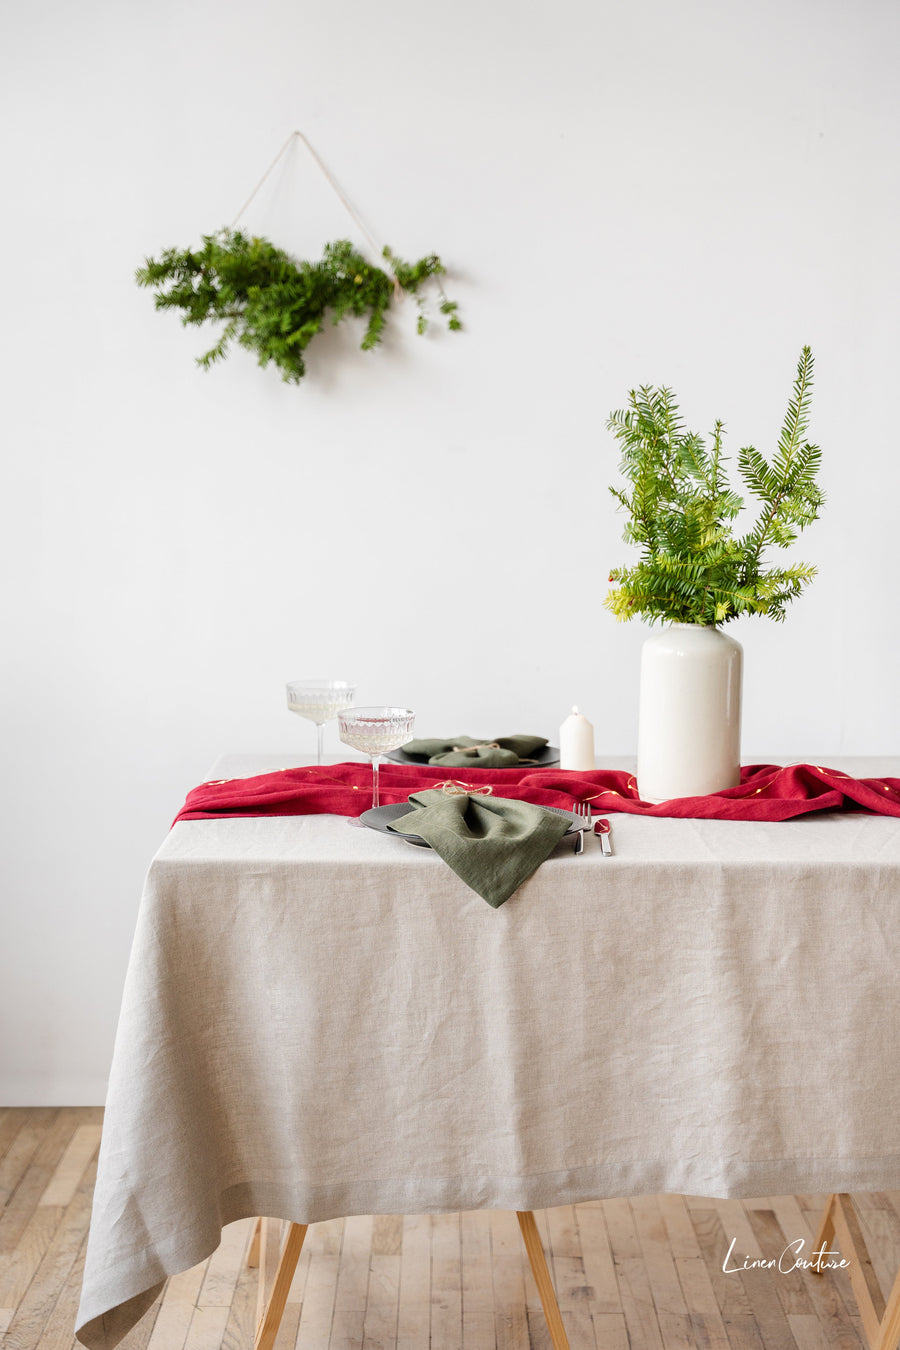 Handmade Natural Linen Christmas Tablecloth for Dining Tables - Linen Couture Boutique